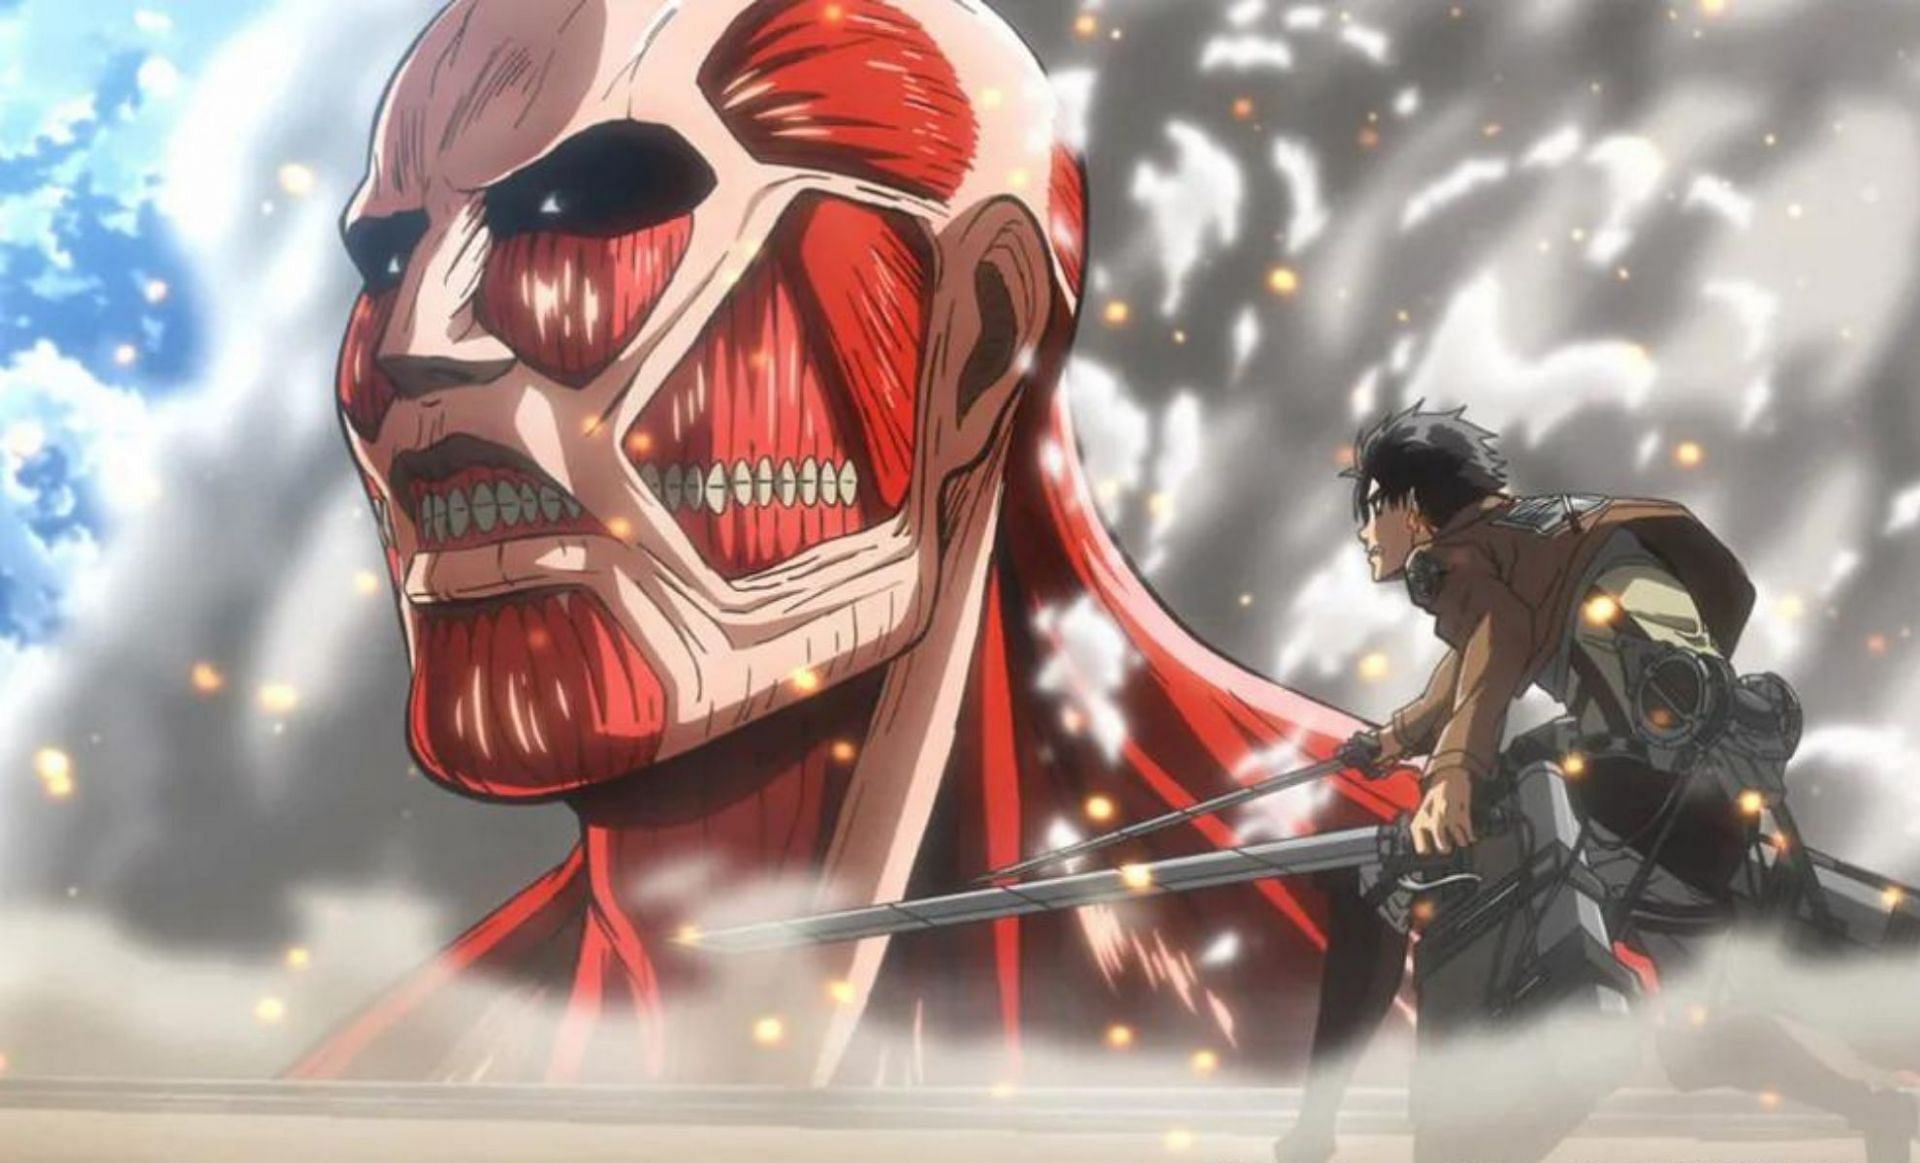 Attack on Titan's most popular characters grapple into Fortnite with latest  update - Dot Esports